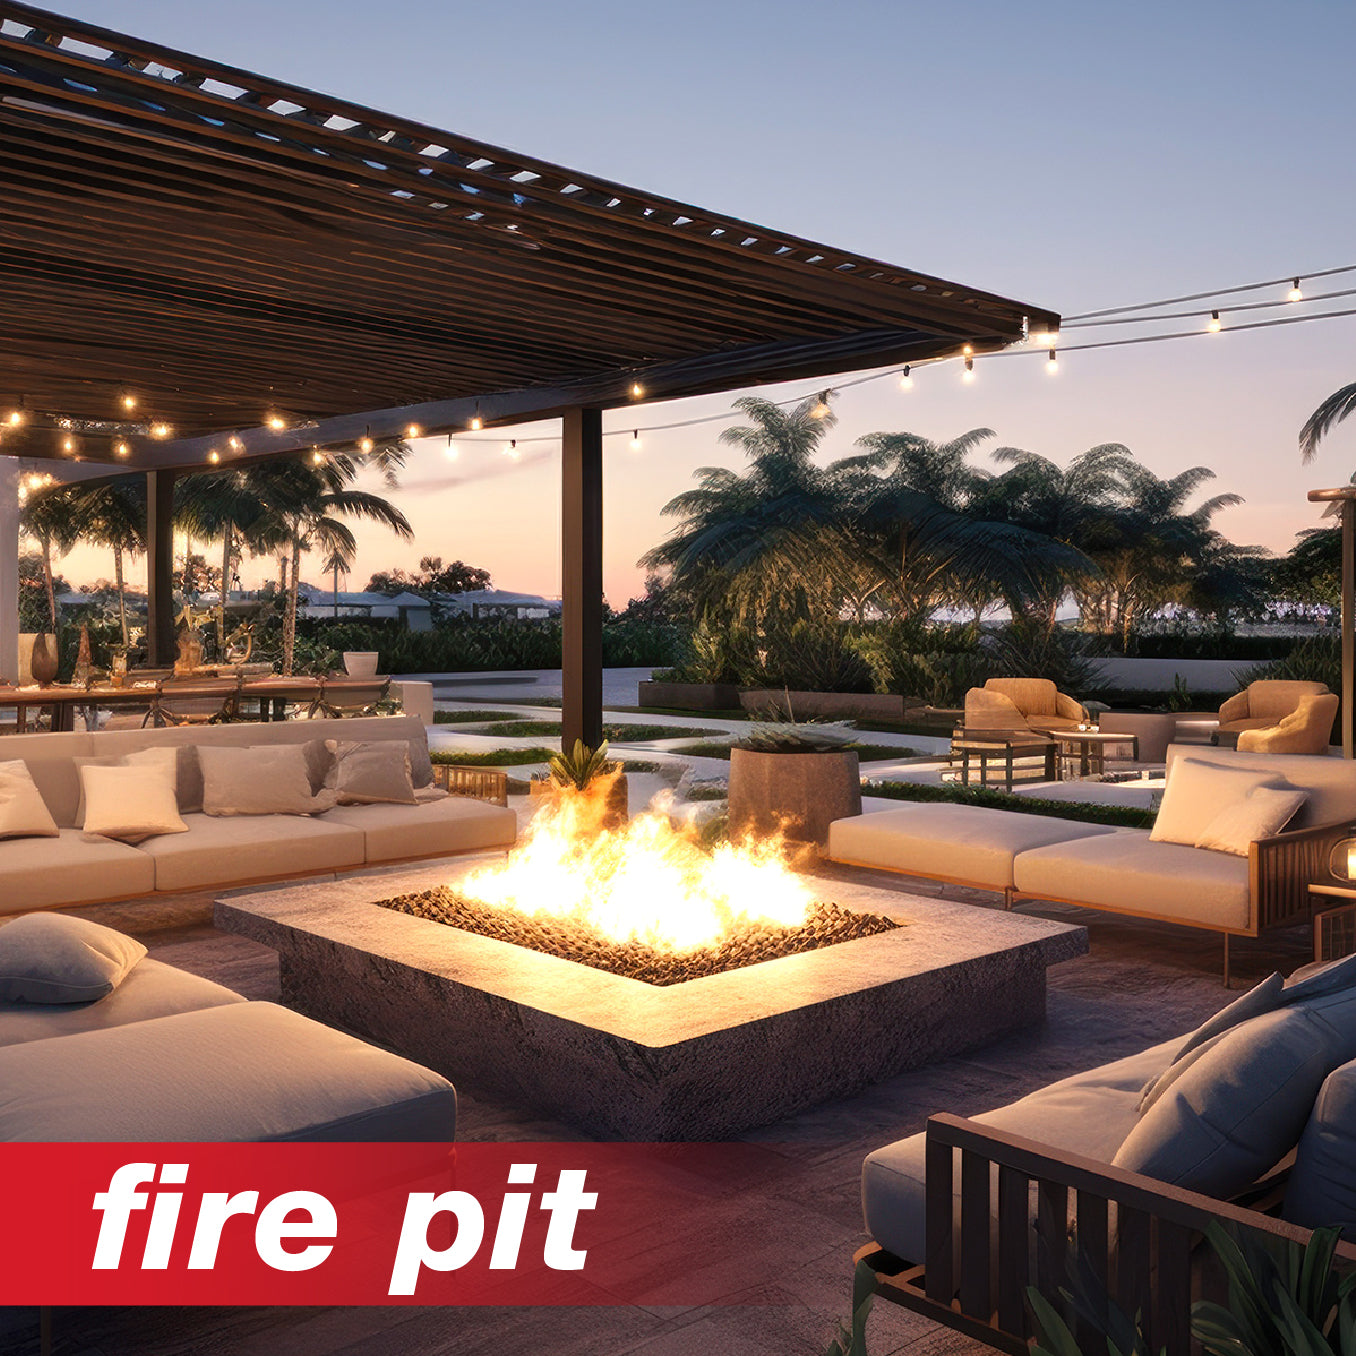 Gas timer apply to gas fire pit or DIY building